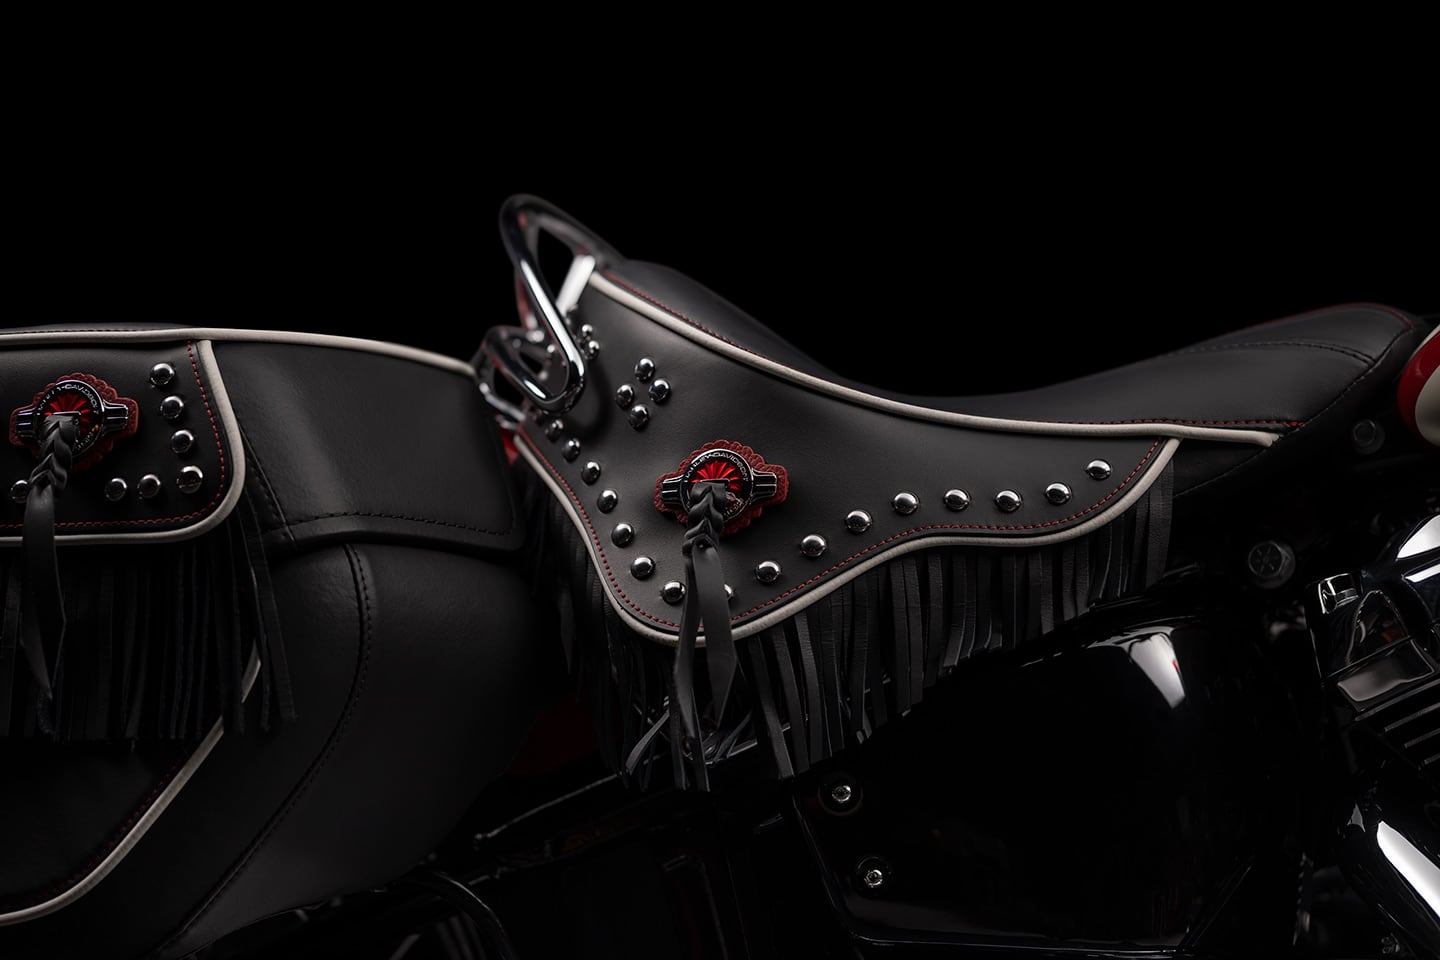 The Hydra-Glide’s solo saddle is embellished with fringe, contrast stitching, piping, and “candy-colored rosettes.”